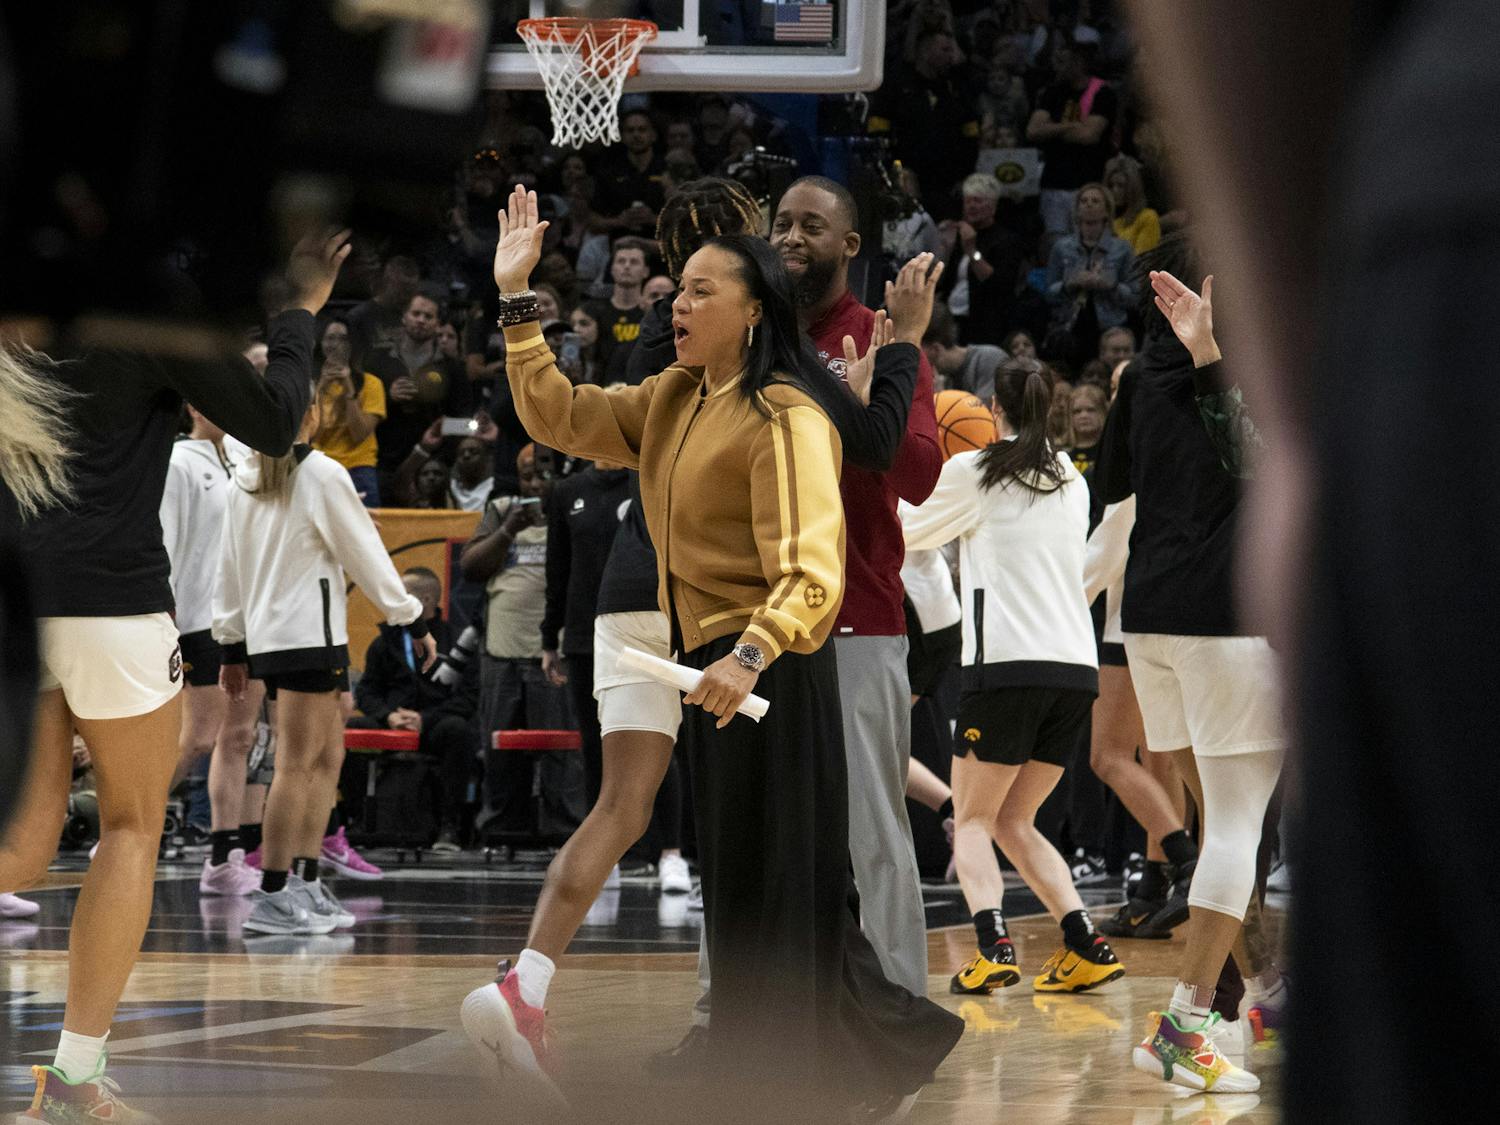 Head coach Dawn Staley gives a high-five to freshman forward Chloe Kitts during warm-ups against the University of Iowa at the Women's Final Four match on March 31, 2023. The Gamecocks lost to the Hawkeyes 77-74